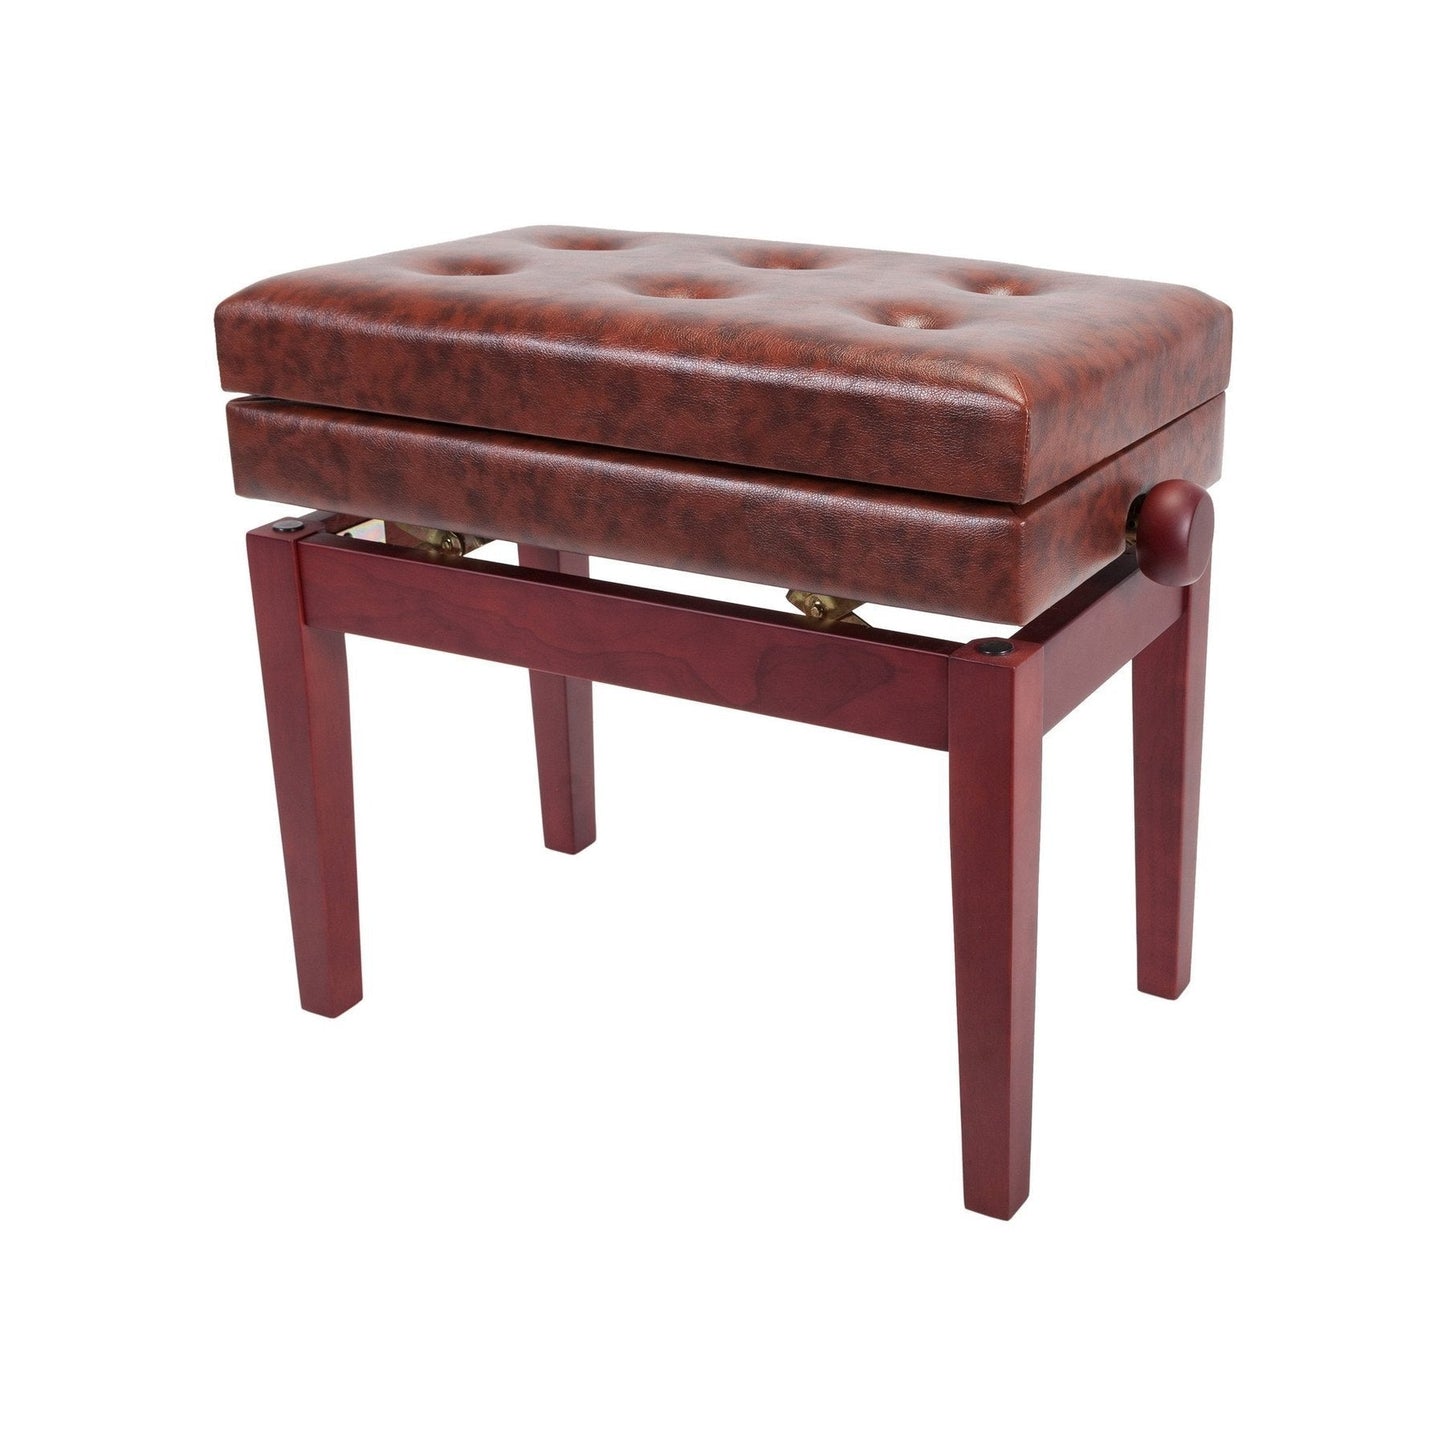 Crown Deluxe Tufted Height Adjustable Piano Stool with Storage Compartment (Mahogany)